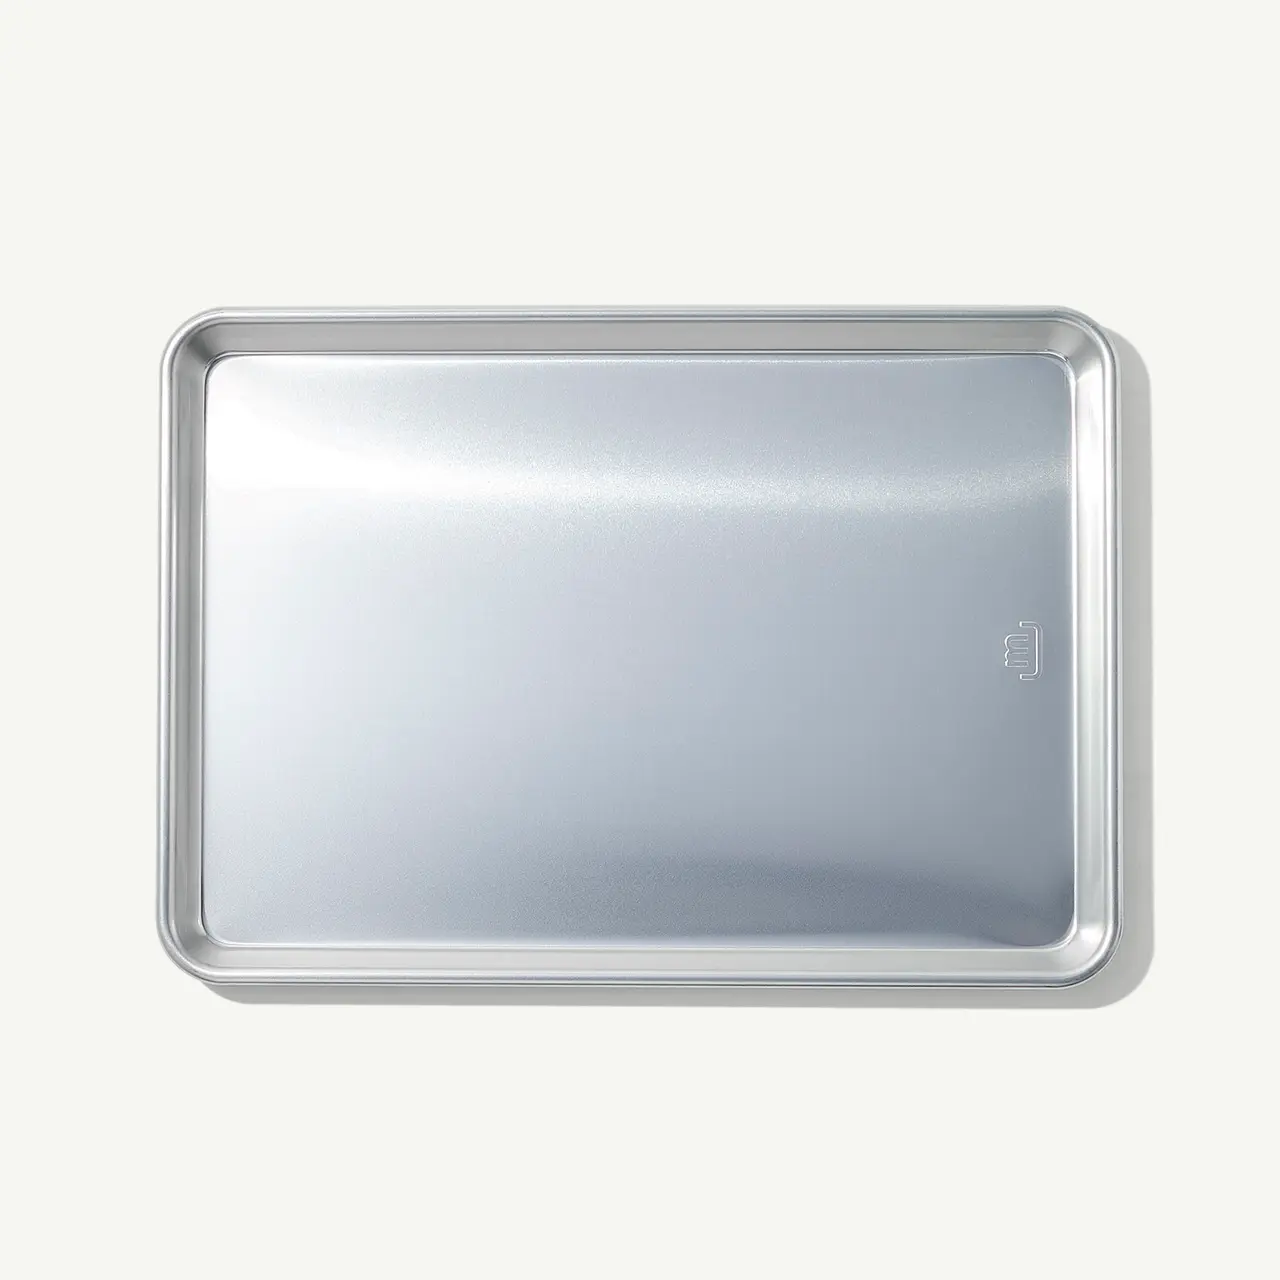 A stainless steel tray with rounded corners on a light background.